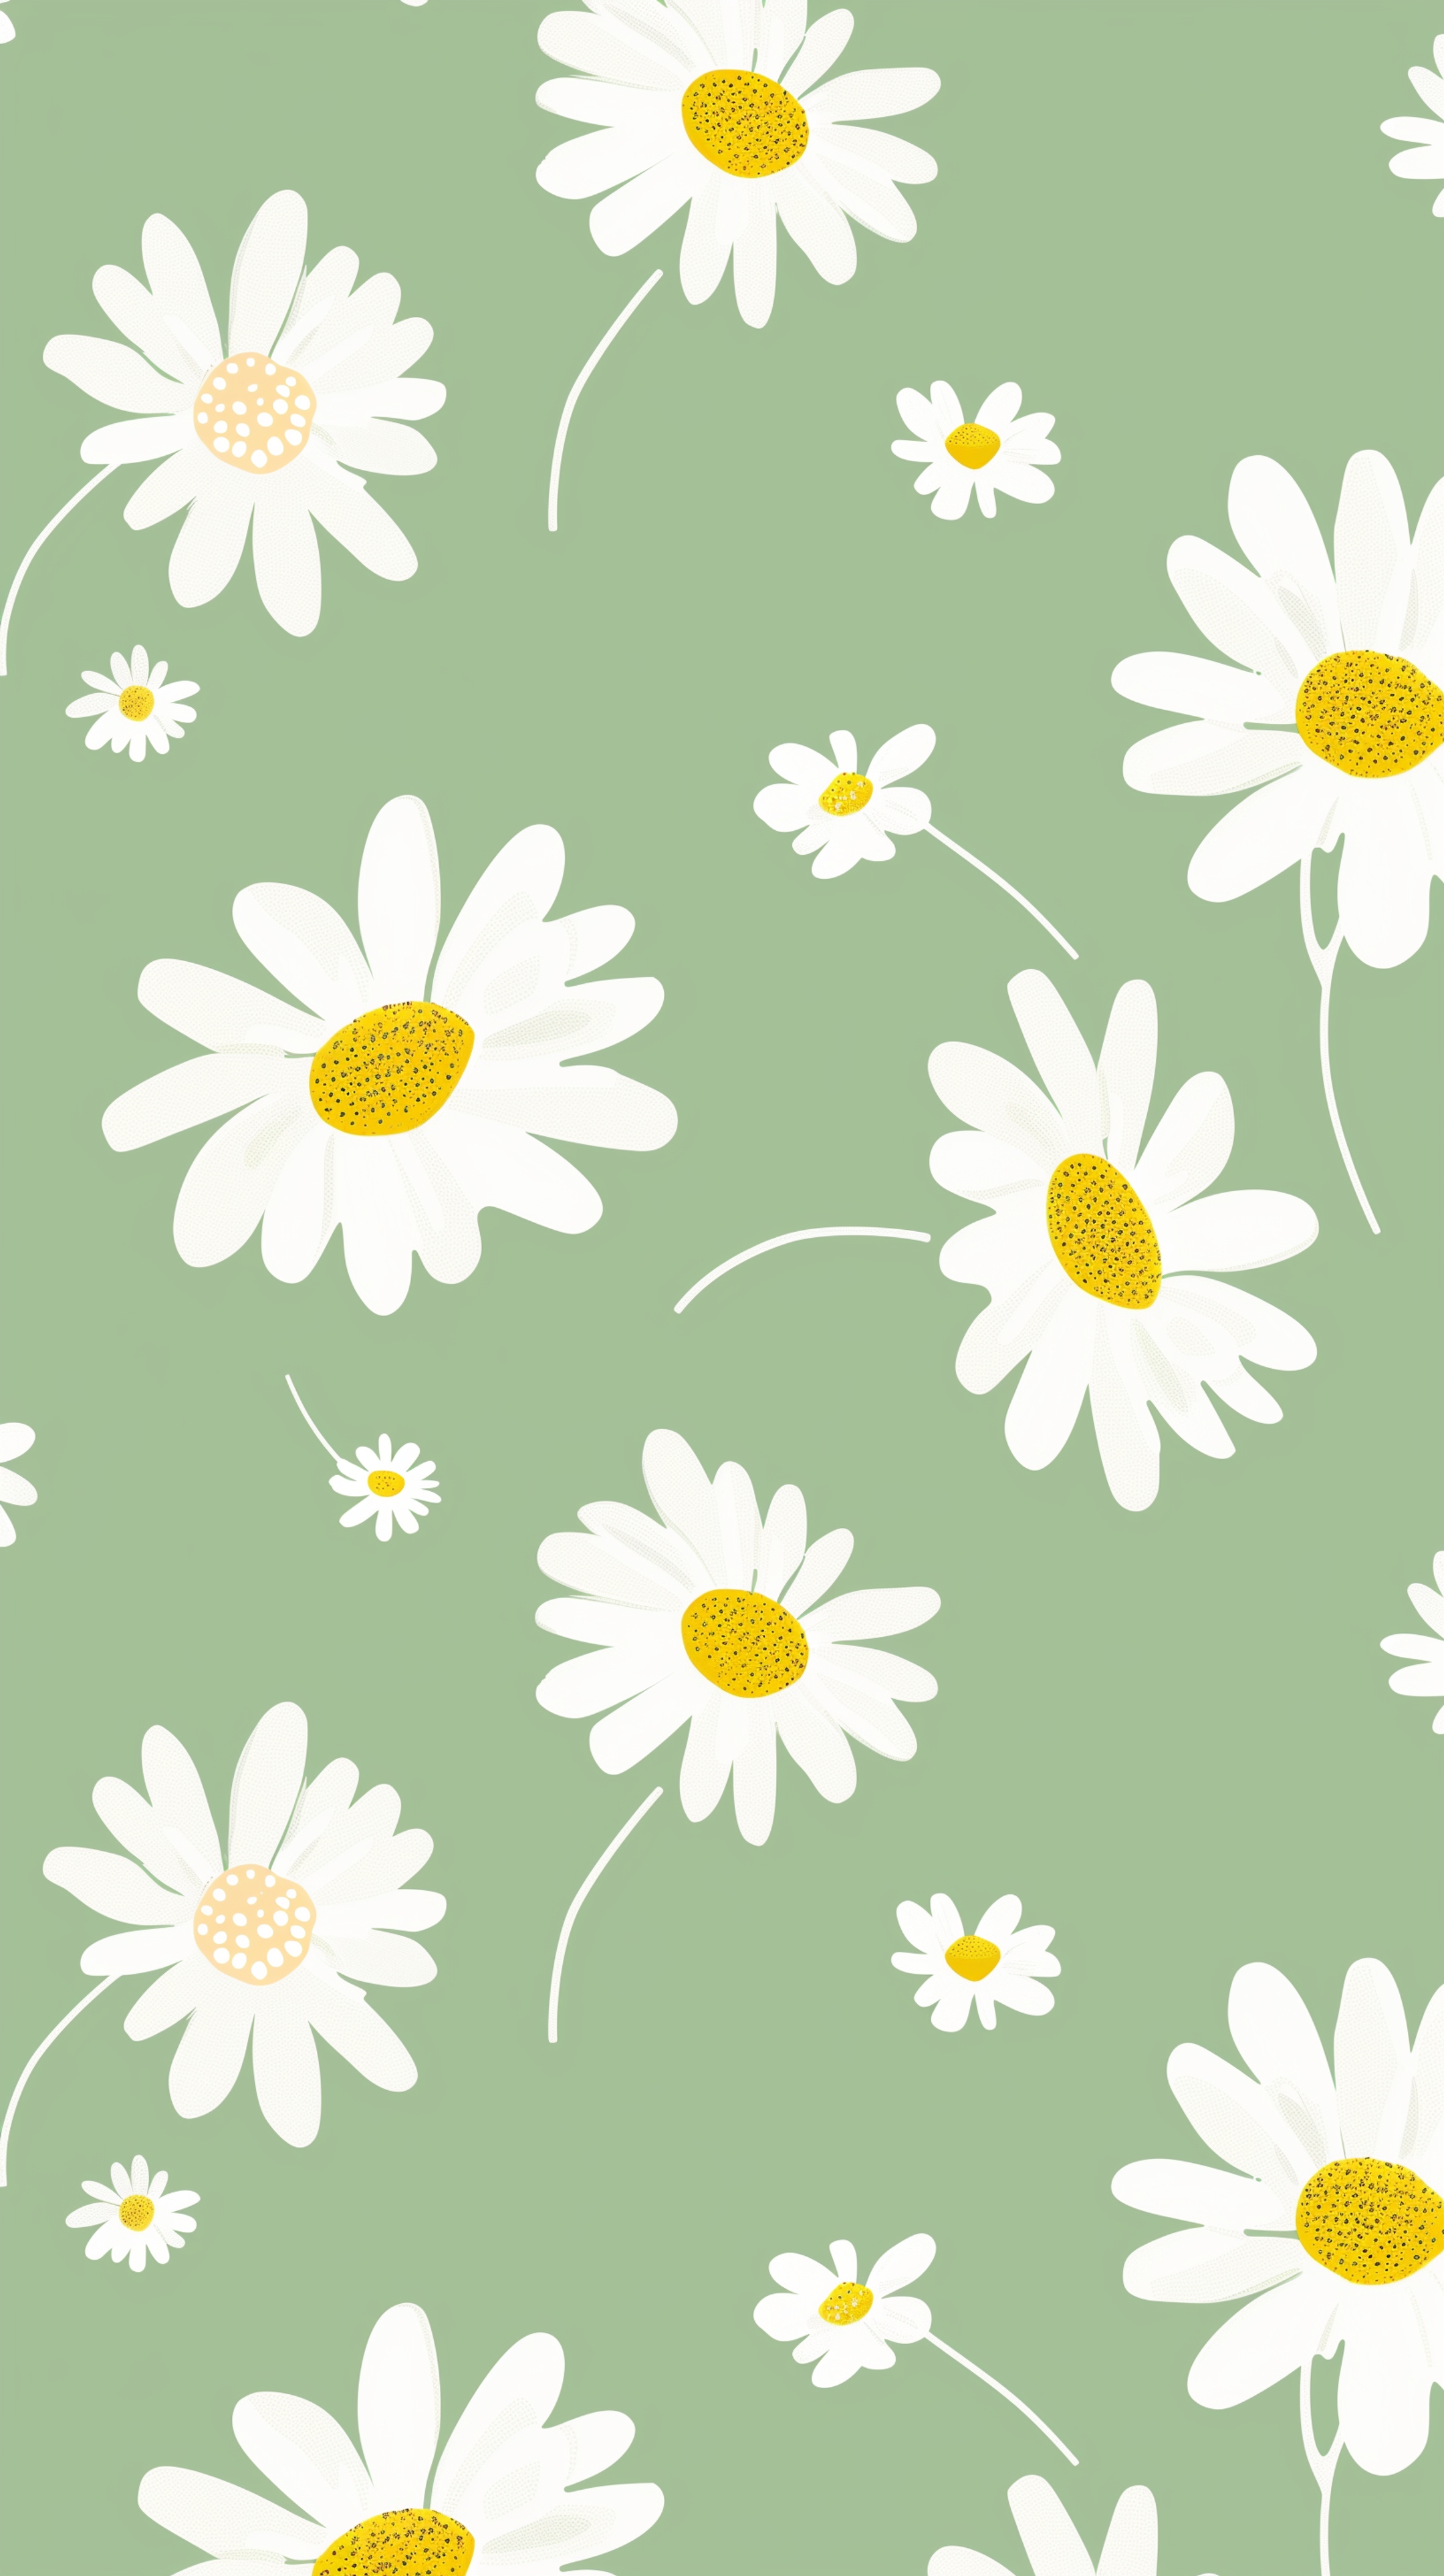 Cheerful Daisy Pattern for Kids Kertas dinding[cc2a0d8b223a410ca032]